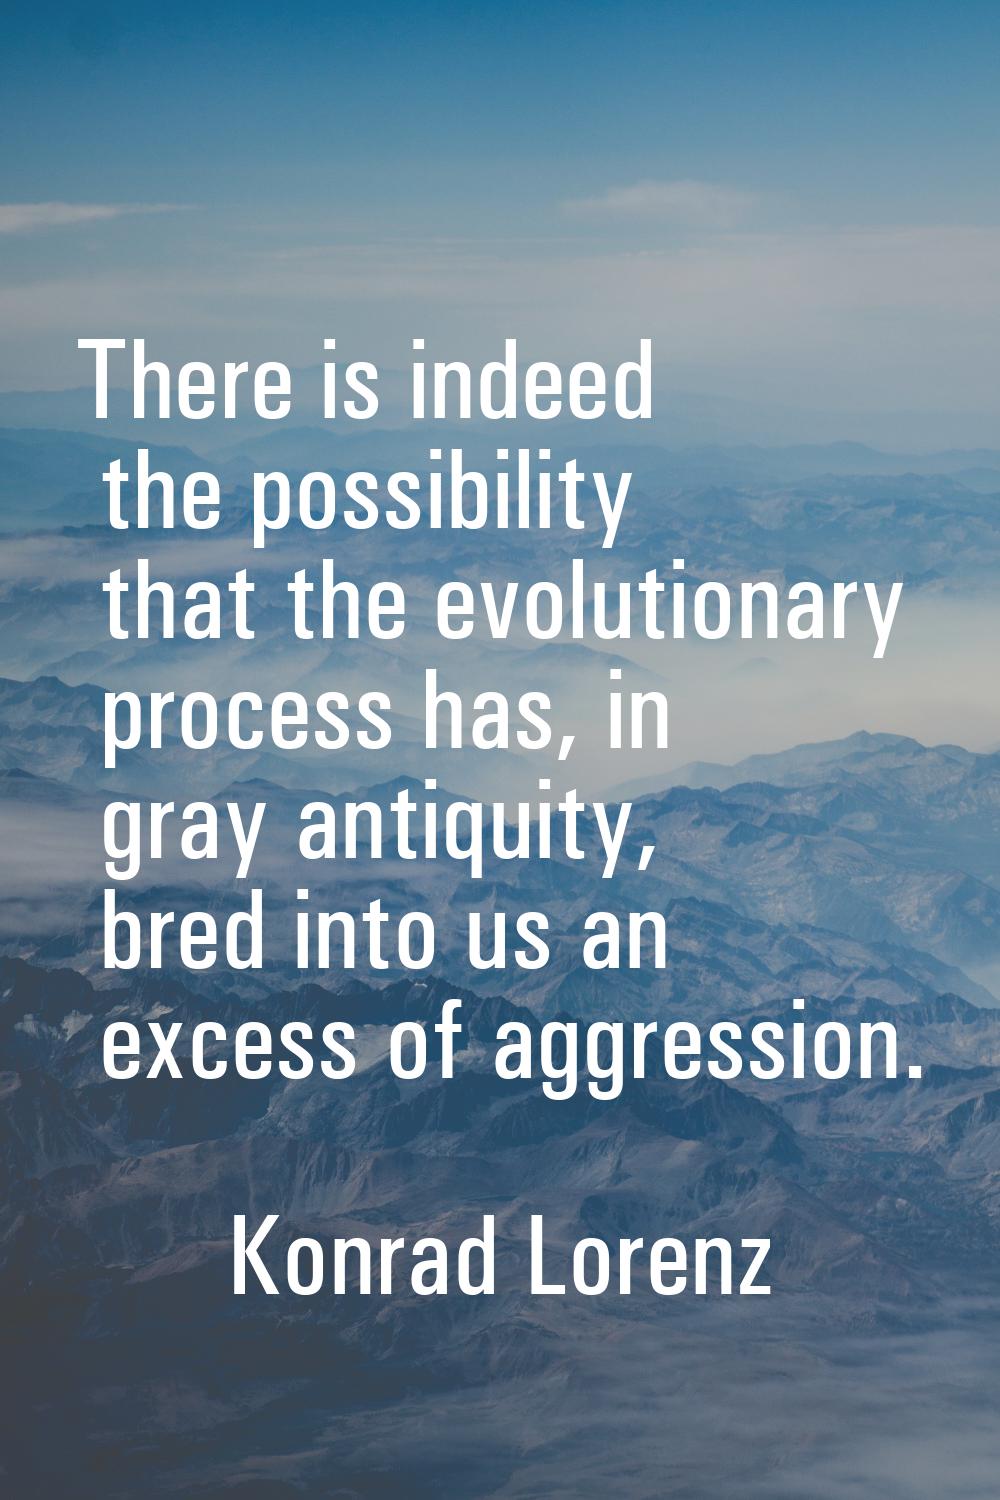 There is indeed the possibility that the evolutionary process has, in gray antiquity, bred into us 